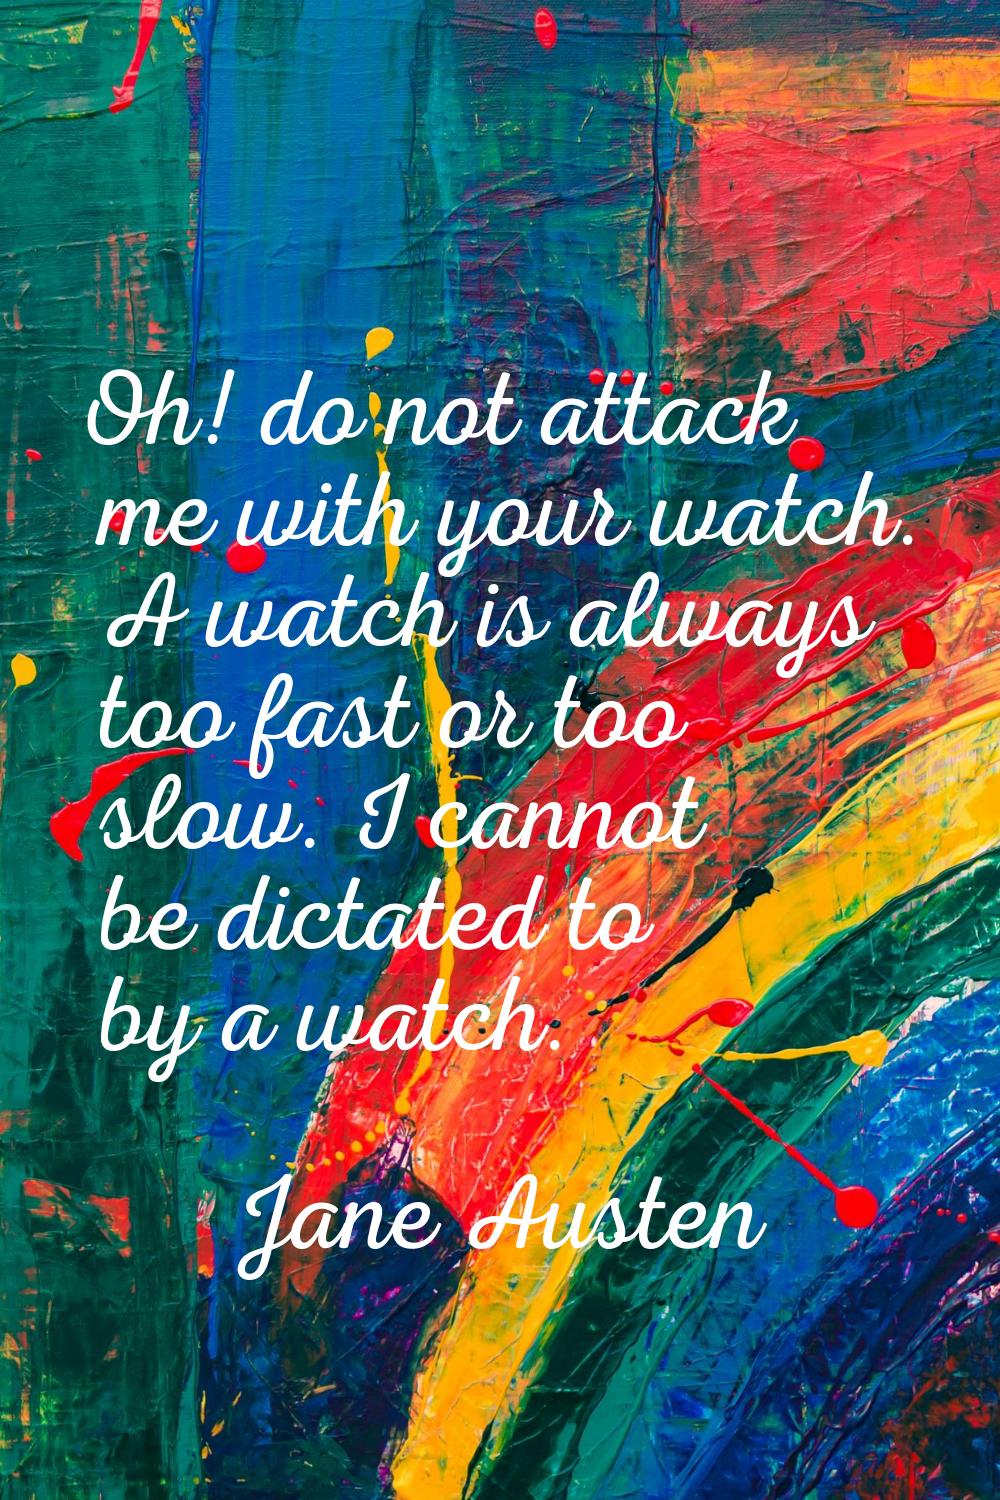 Oh! do not attack me with your watch. A watch is always too fast or too slow. I cannot be dictated 